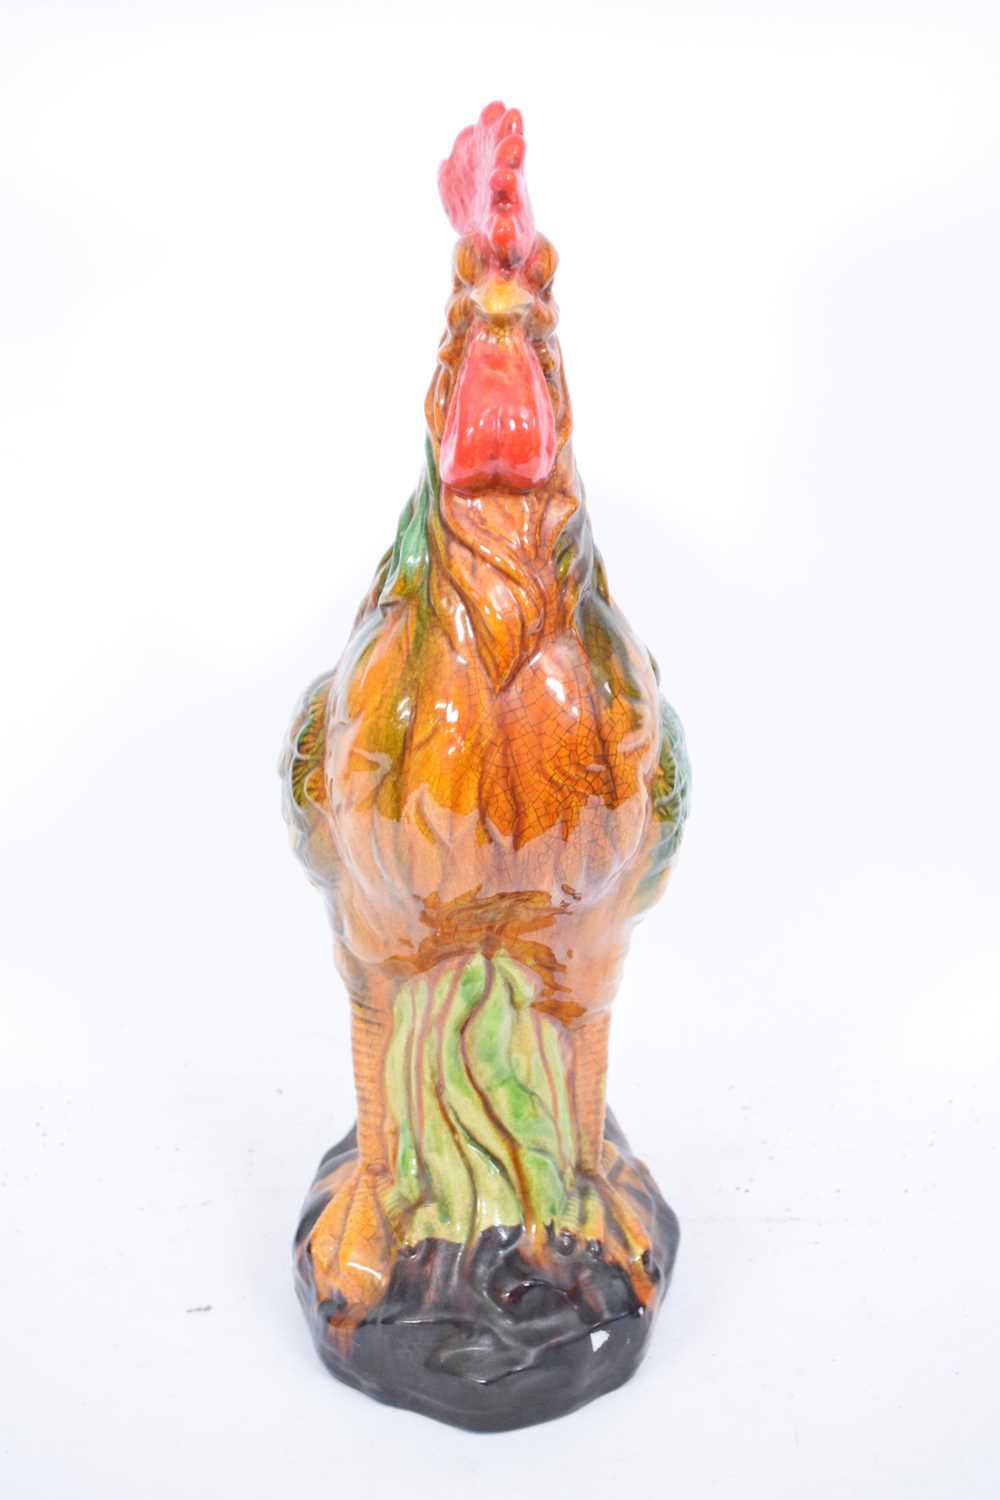 Large ceramic model of a chicken in Majolica glazes - Image 2 of 3